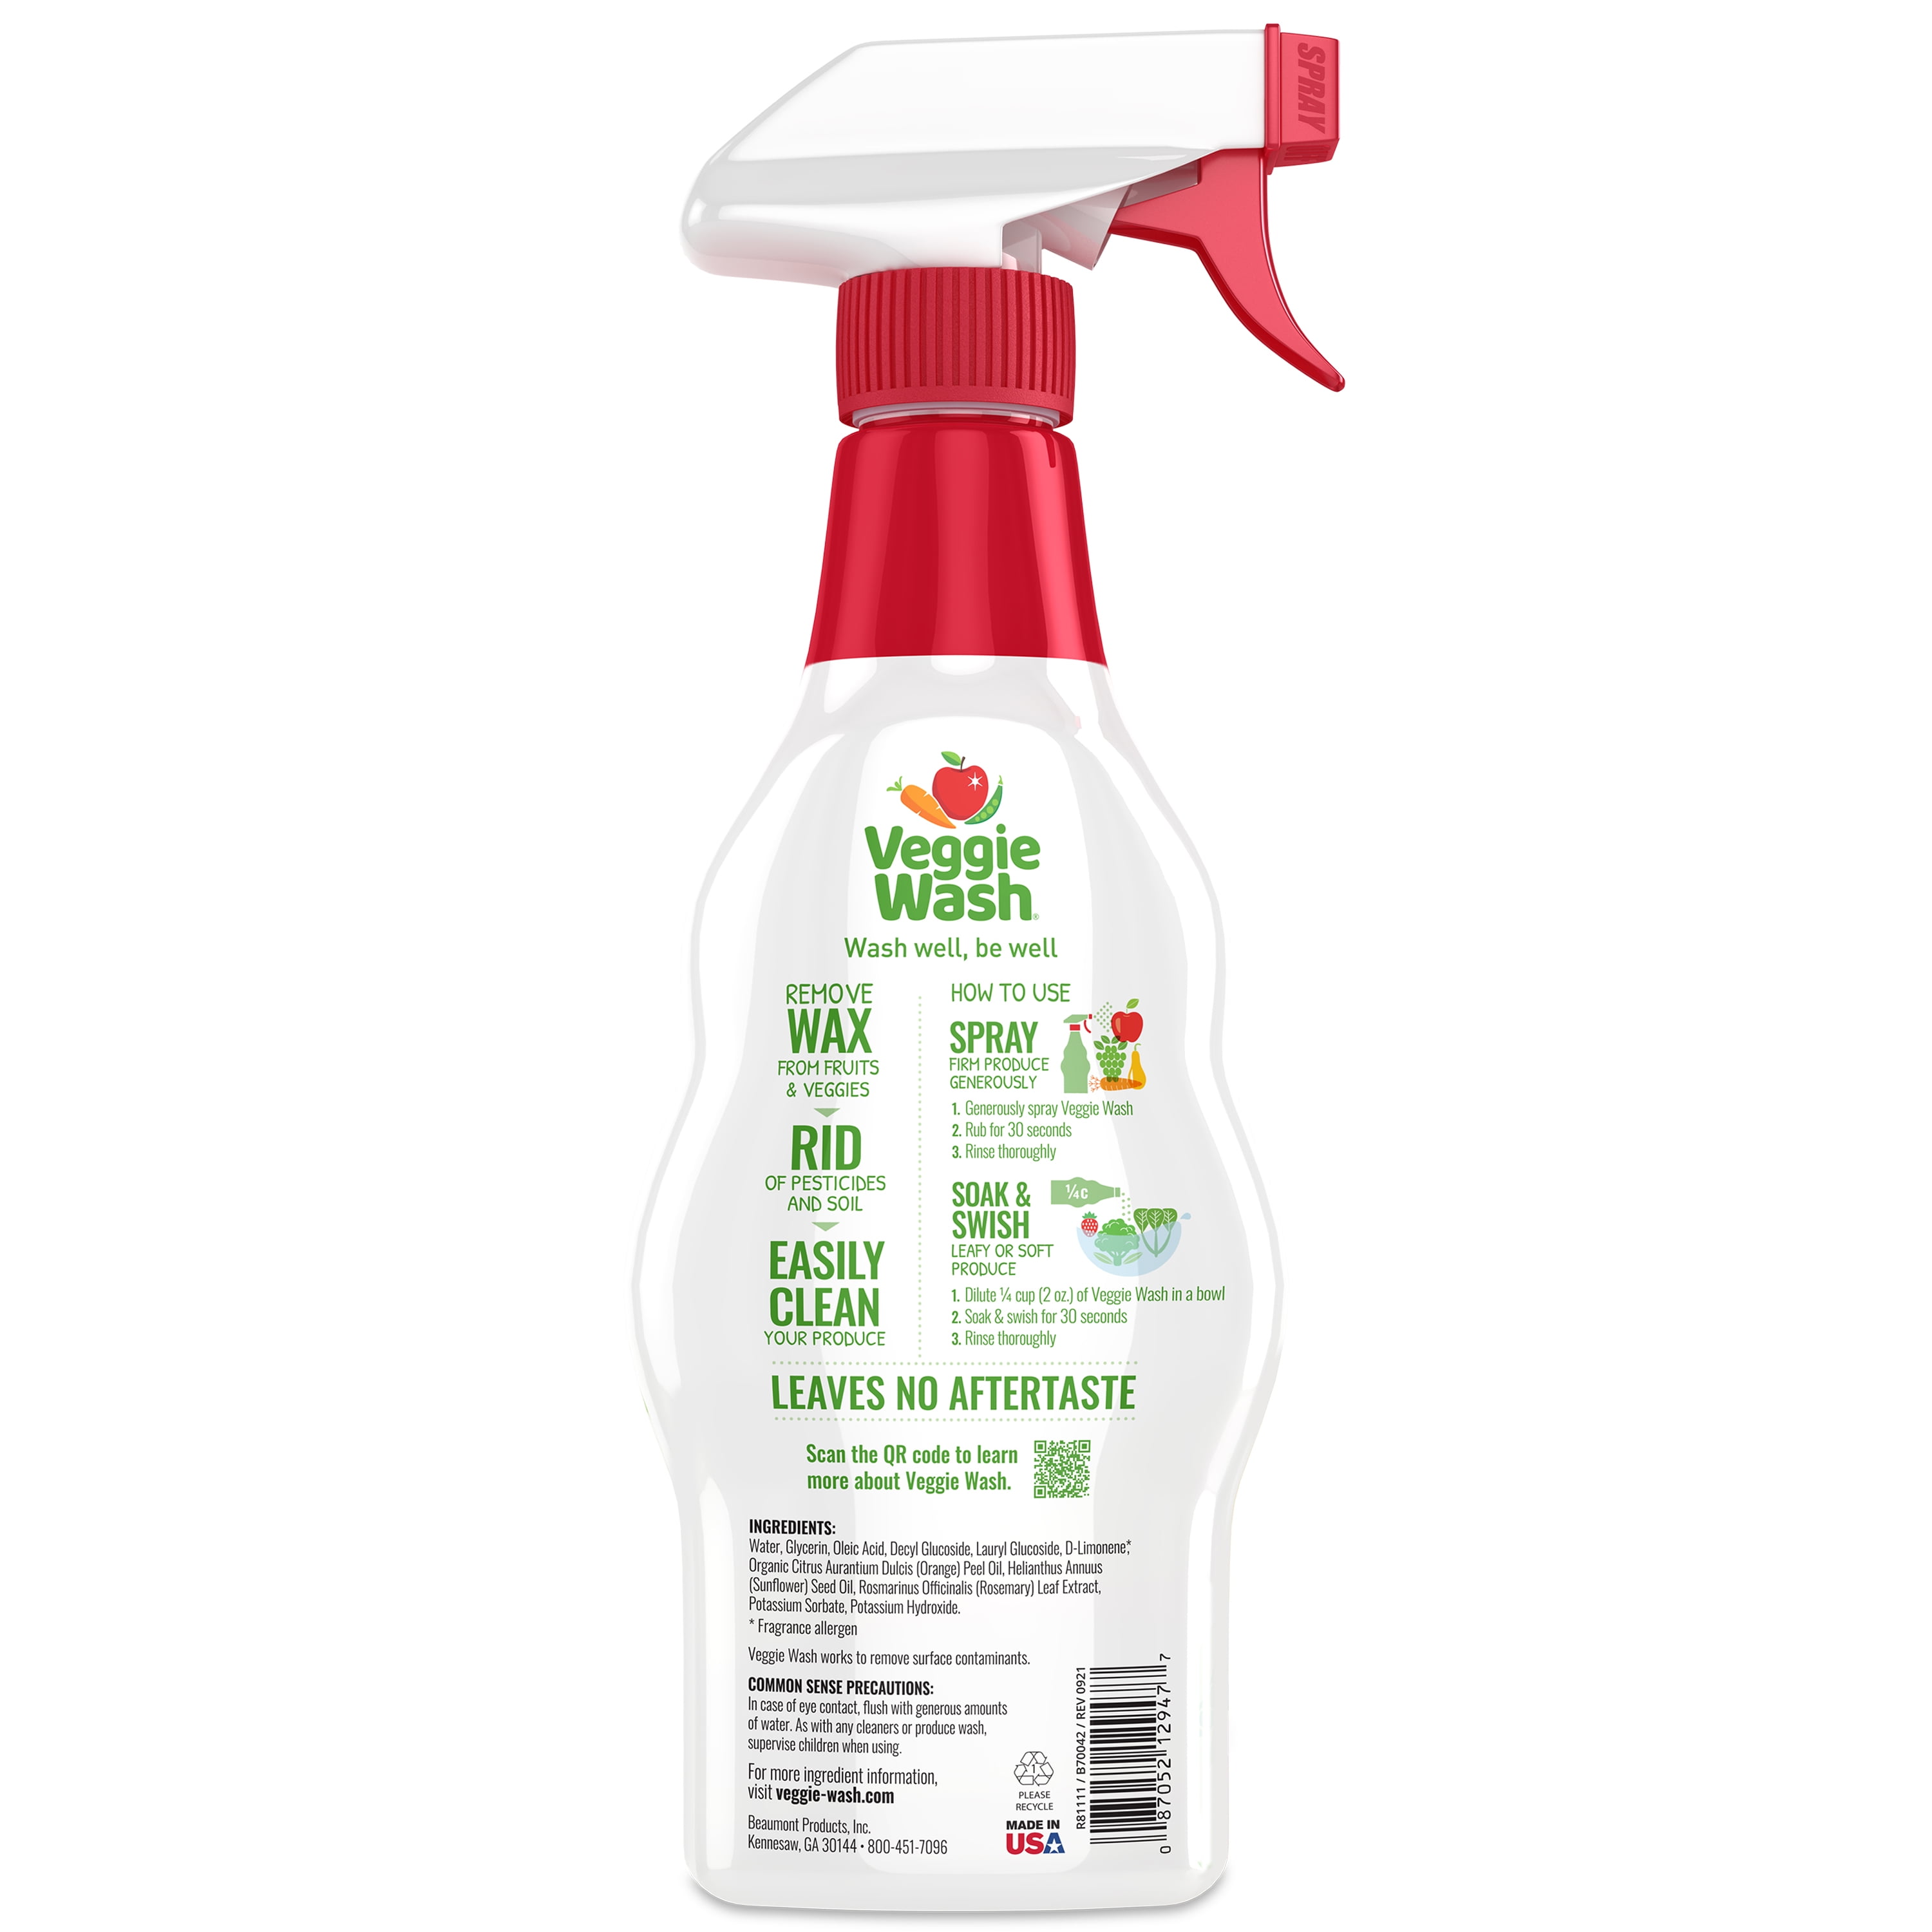 Veggie Wash Fruit and Vegetable Wash, Produce Wash and Cleaner, 16